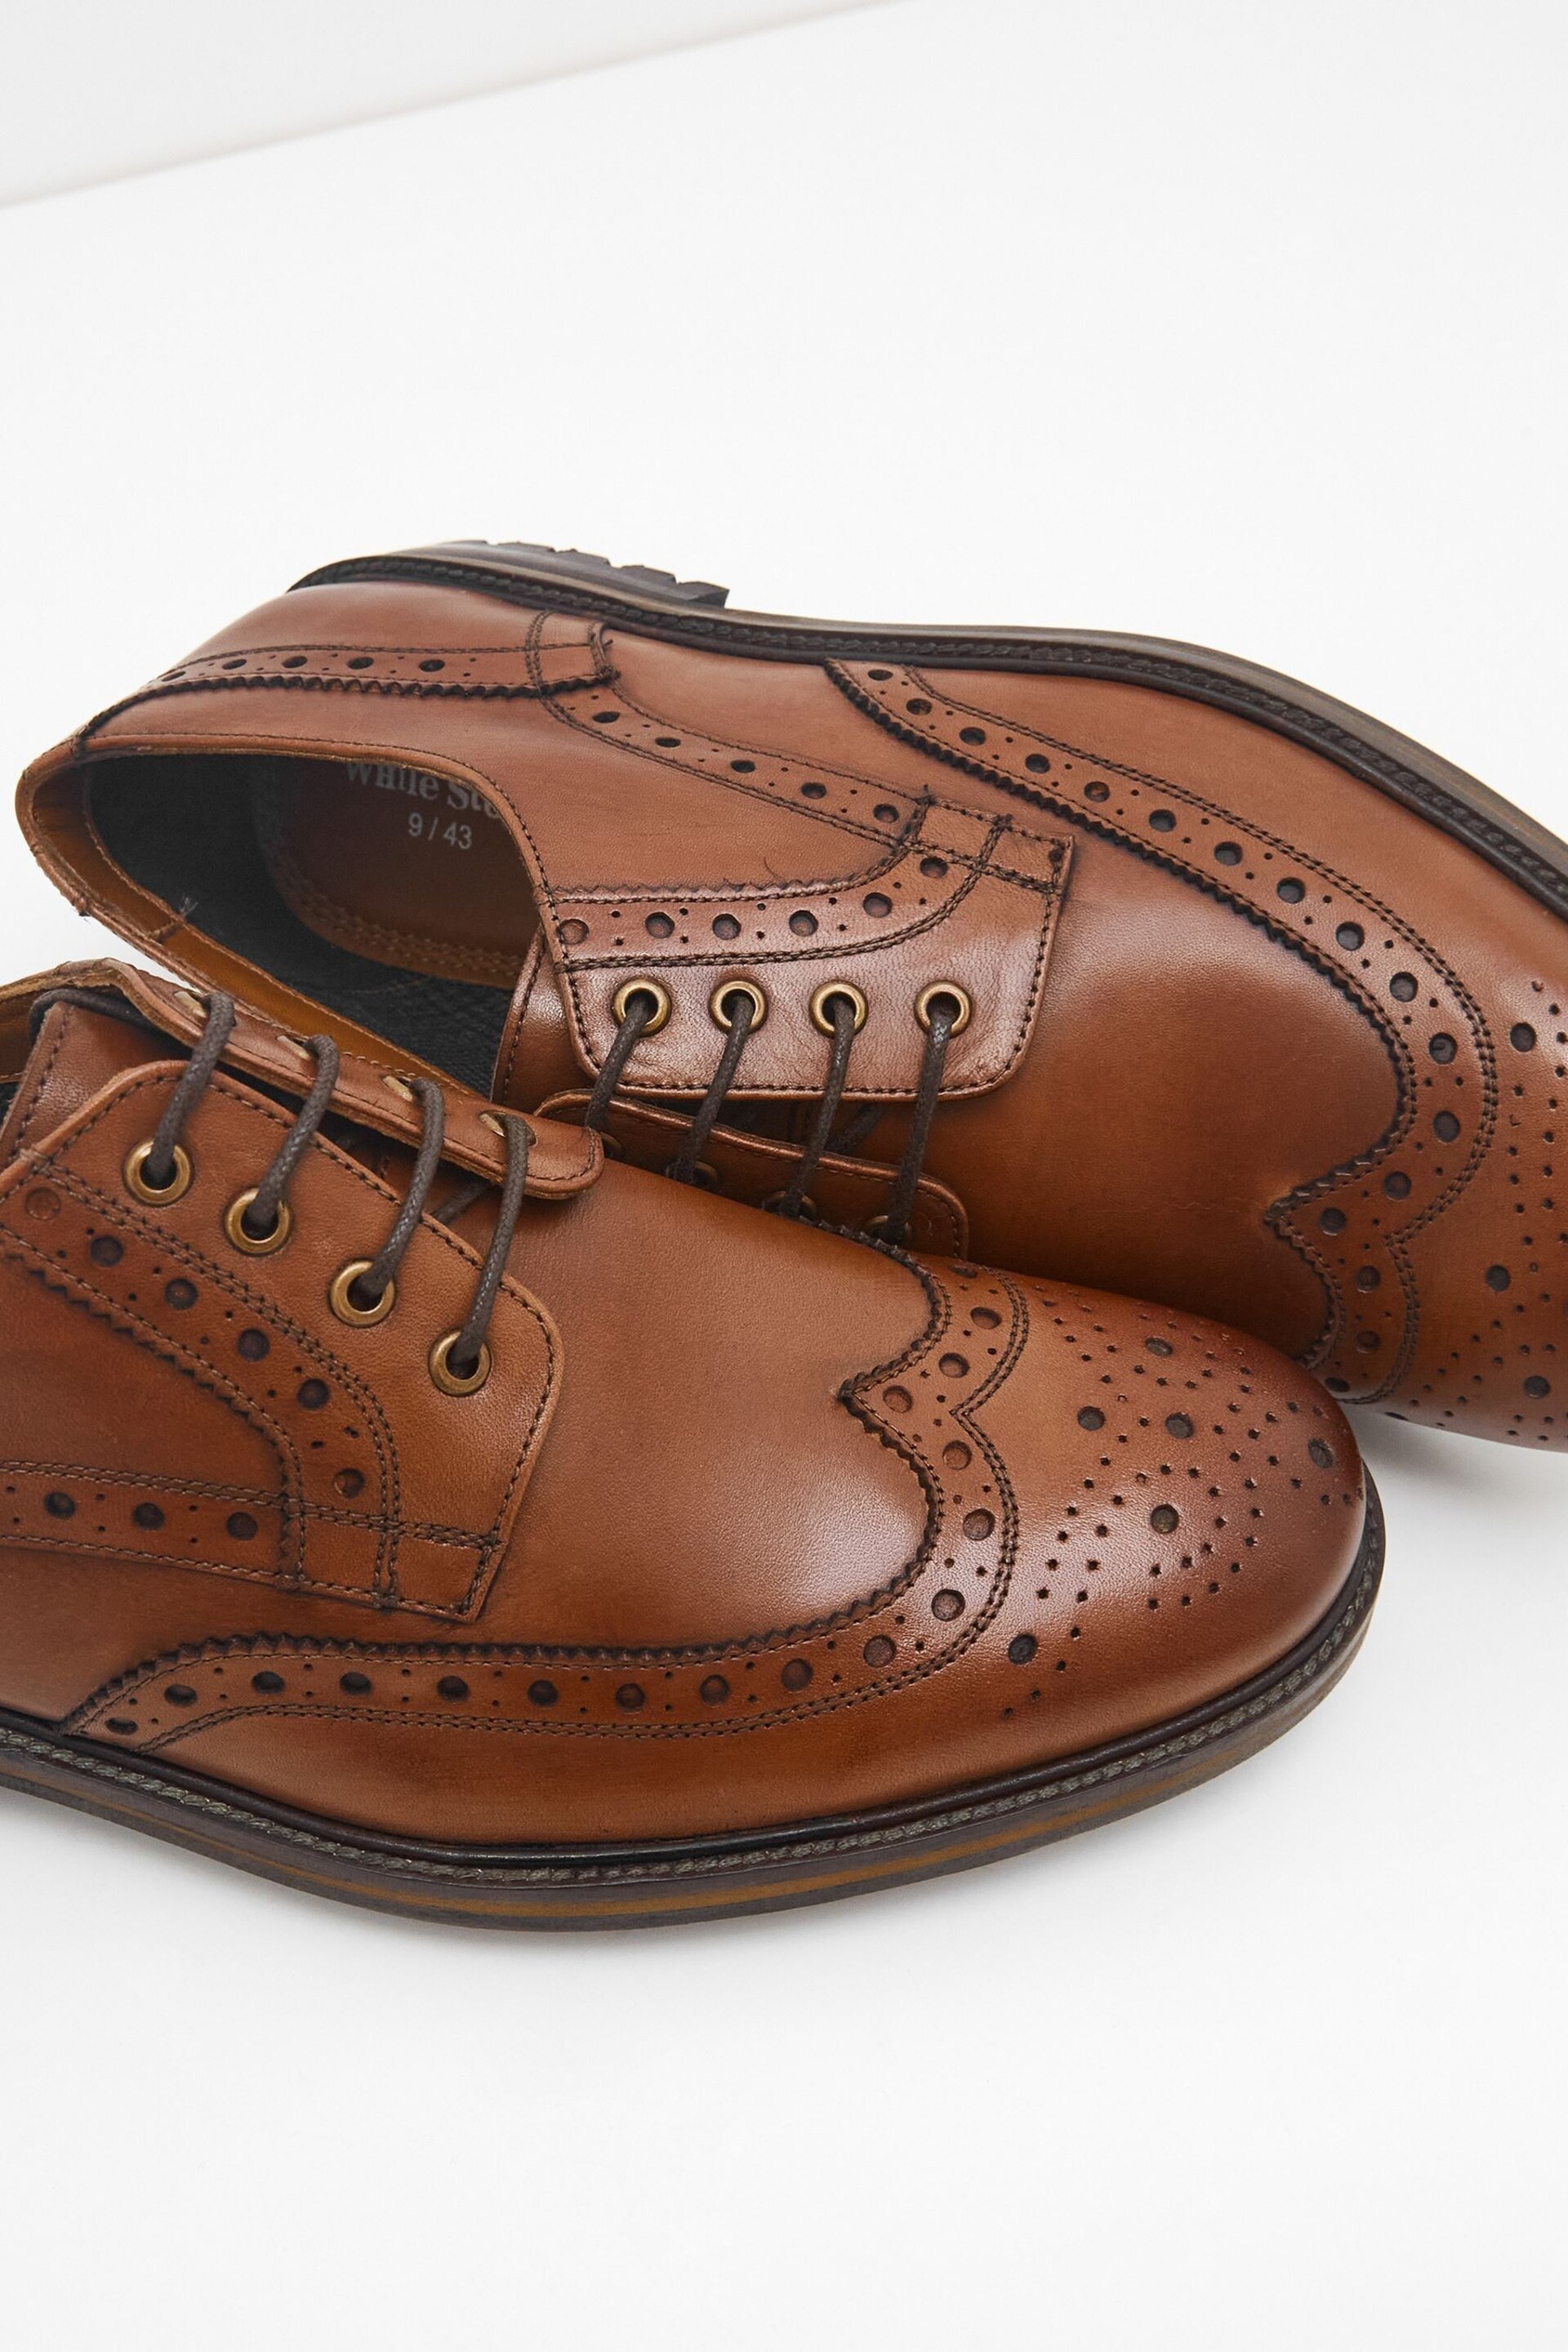 White Stuff Natural Arlo Brogue Leather Shoes - Image 4 of 4